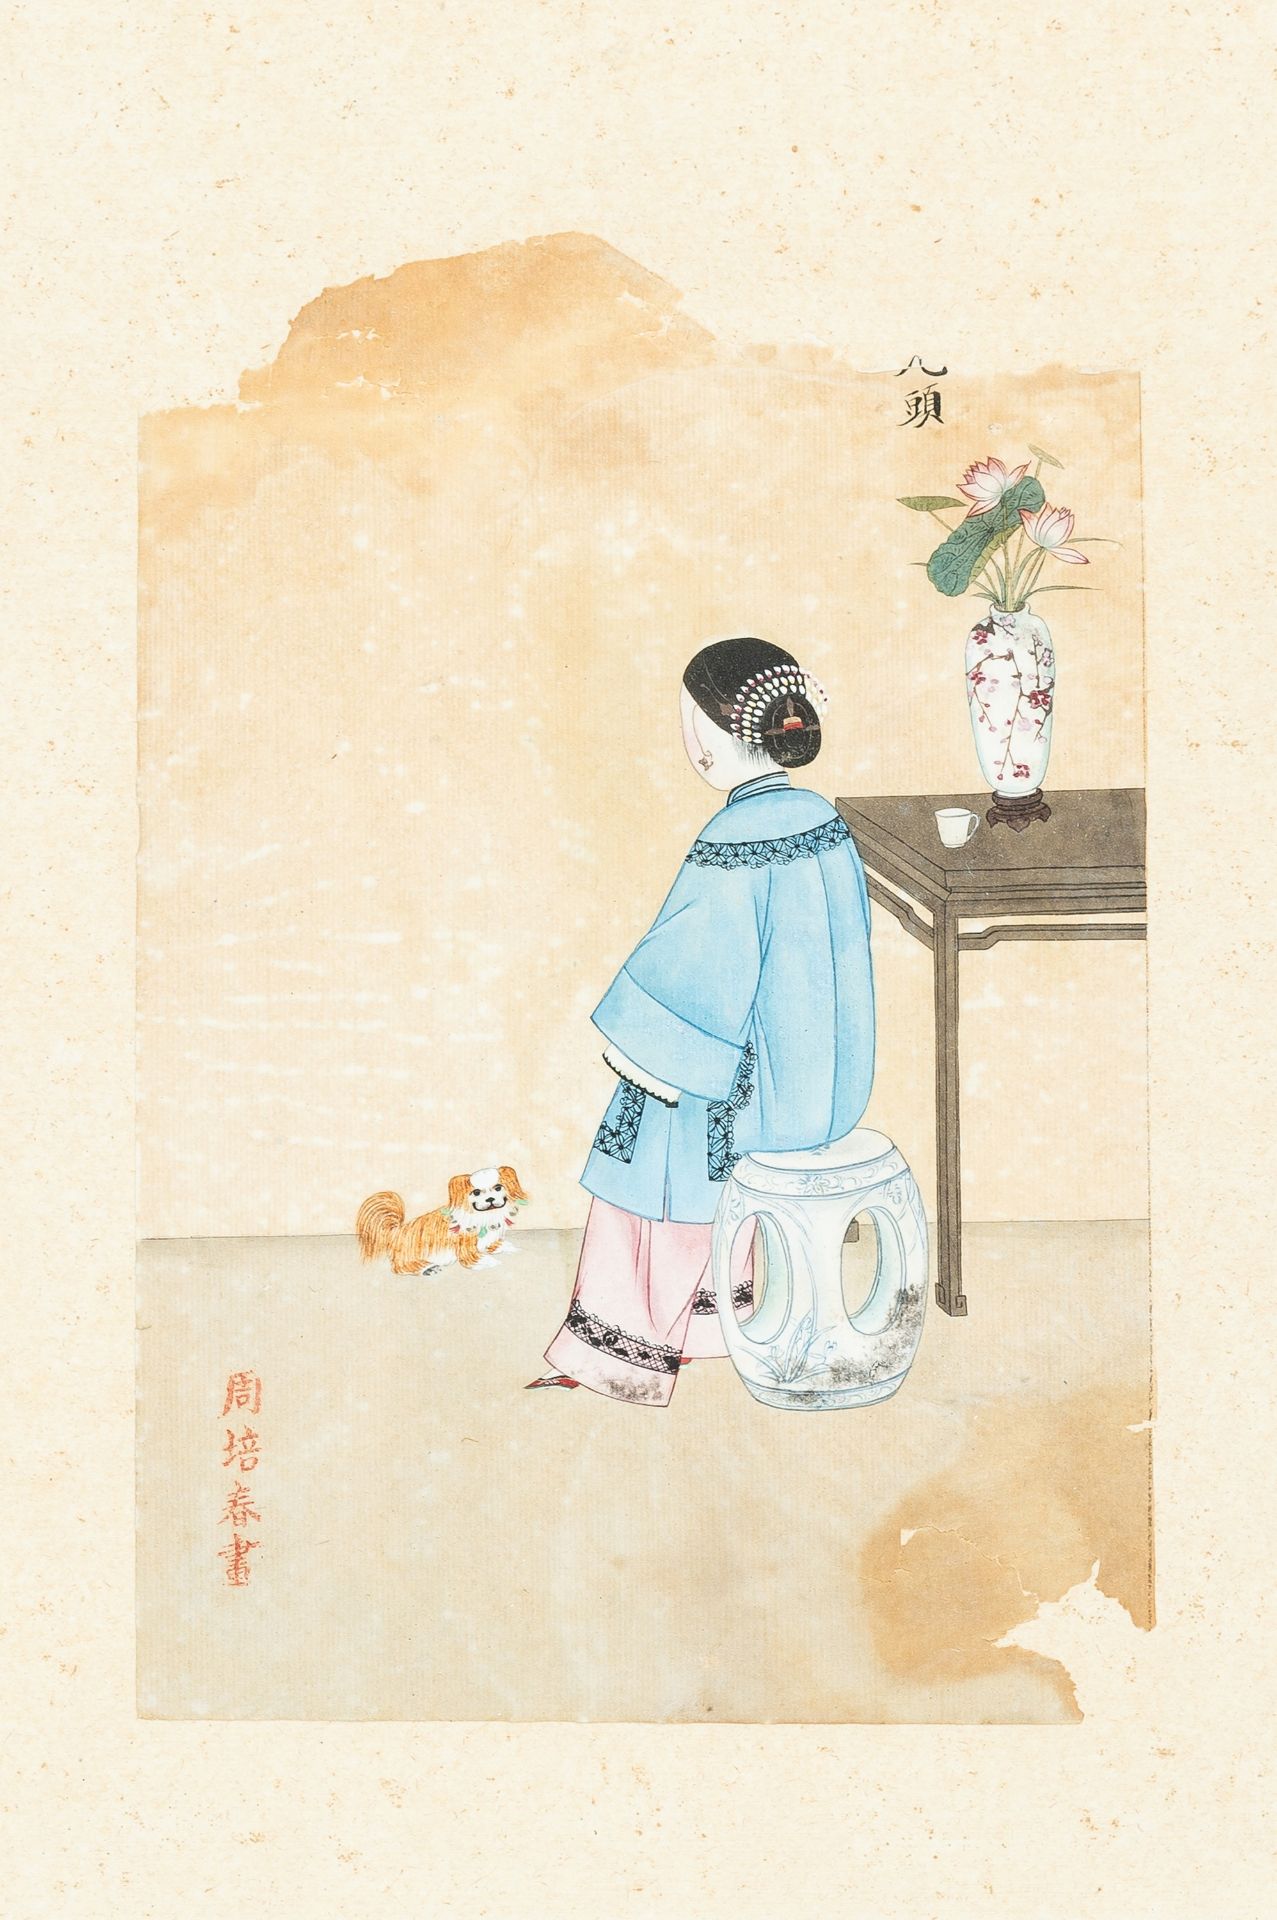 ZHOU PEI CHUN (active 1880-1910): A PAINTING OF A COURT LADY WITH A PEKINGESE, 1900s - Image 3 of 5